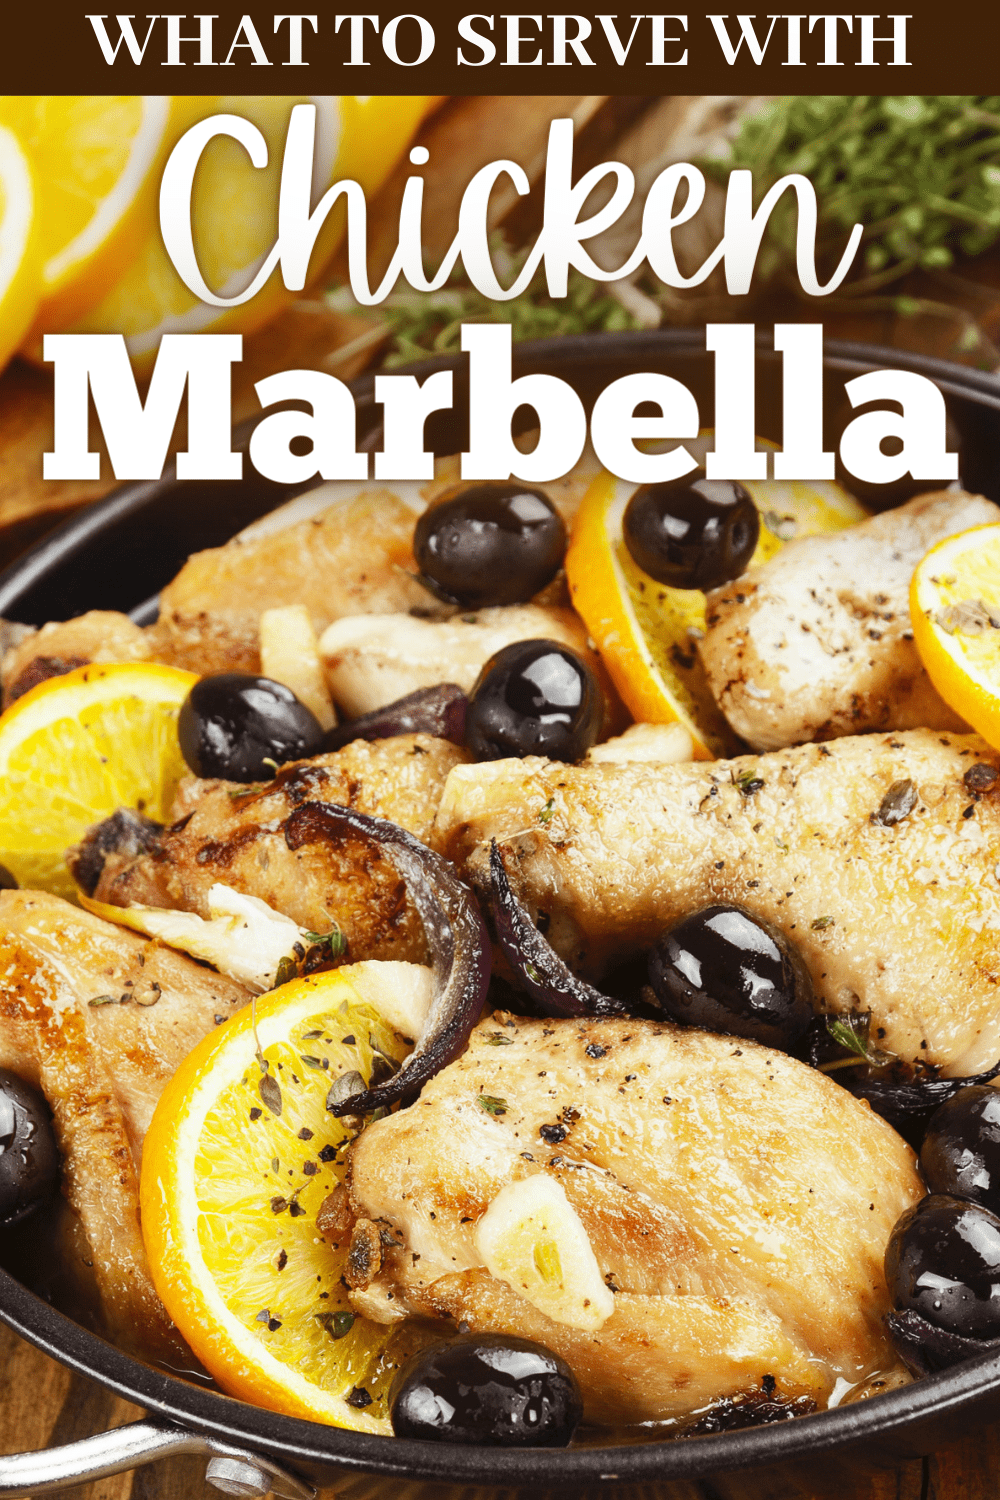 What to Serve with Chicken Marbella (13 Savory Side Dishes) - Insanely Good